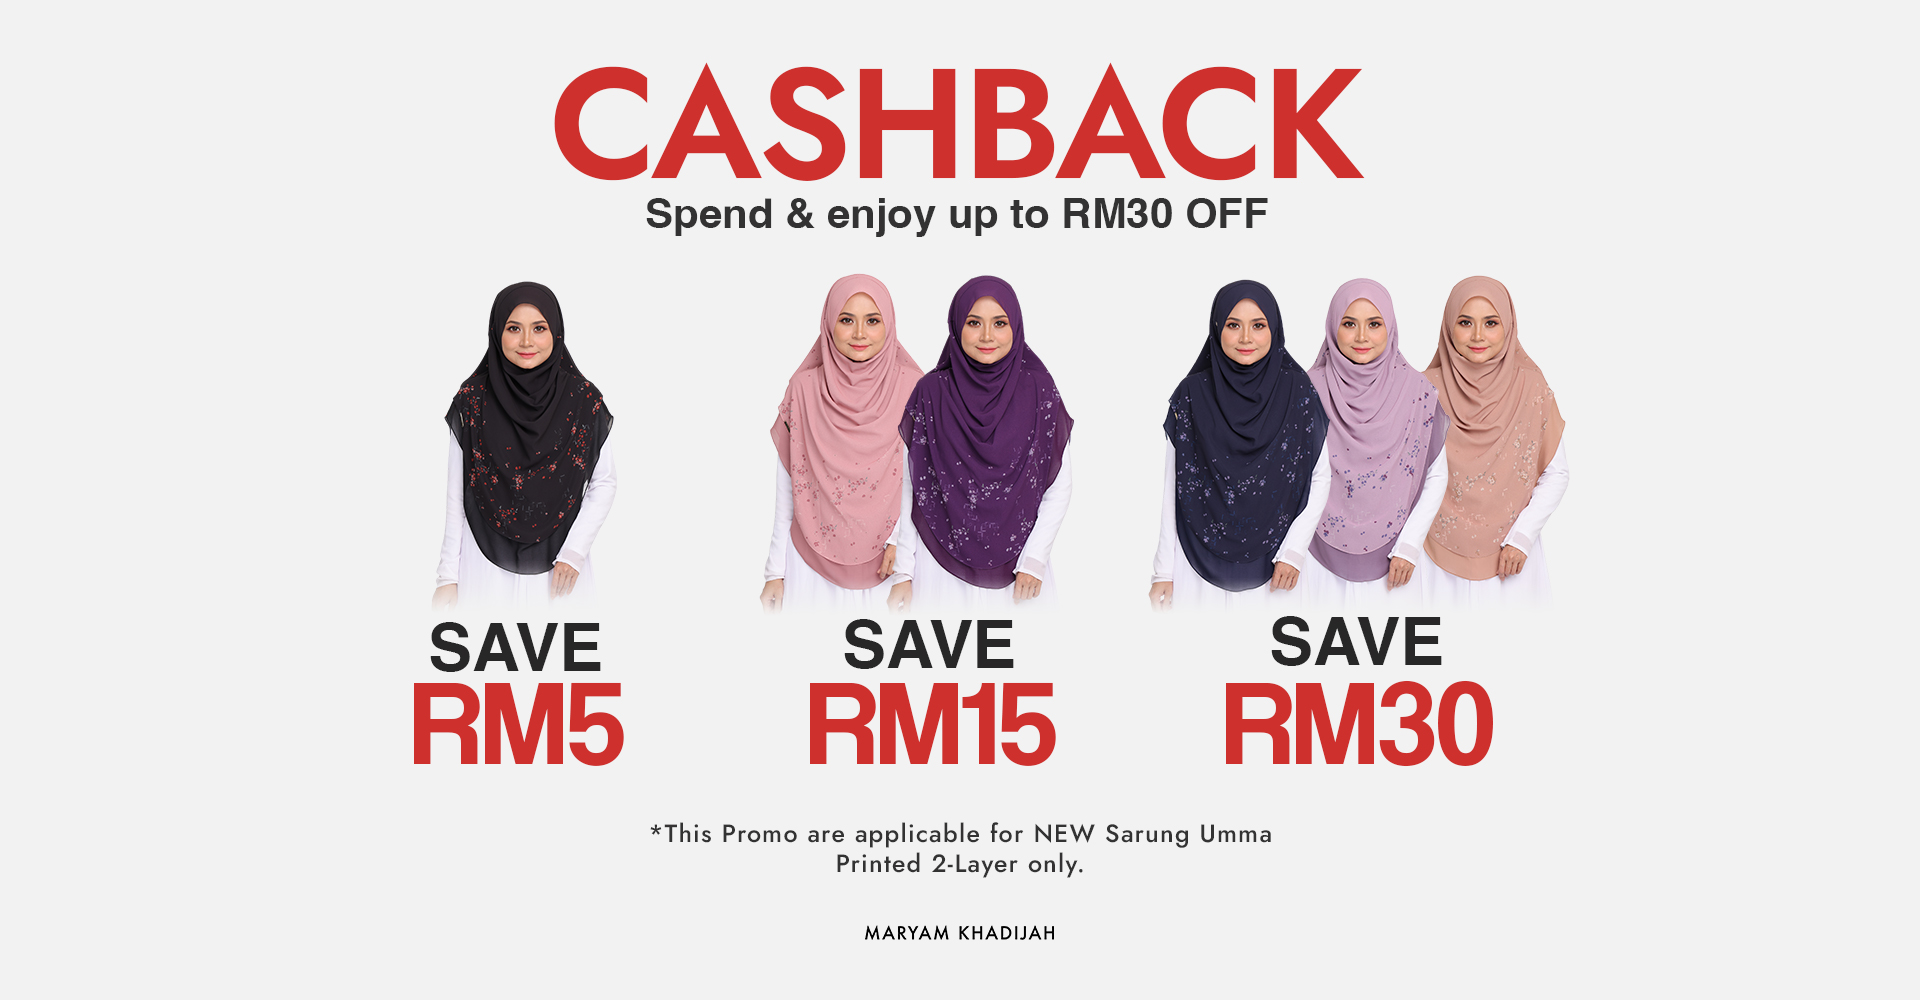 Cashback Up To RM30